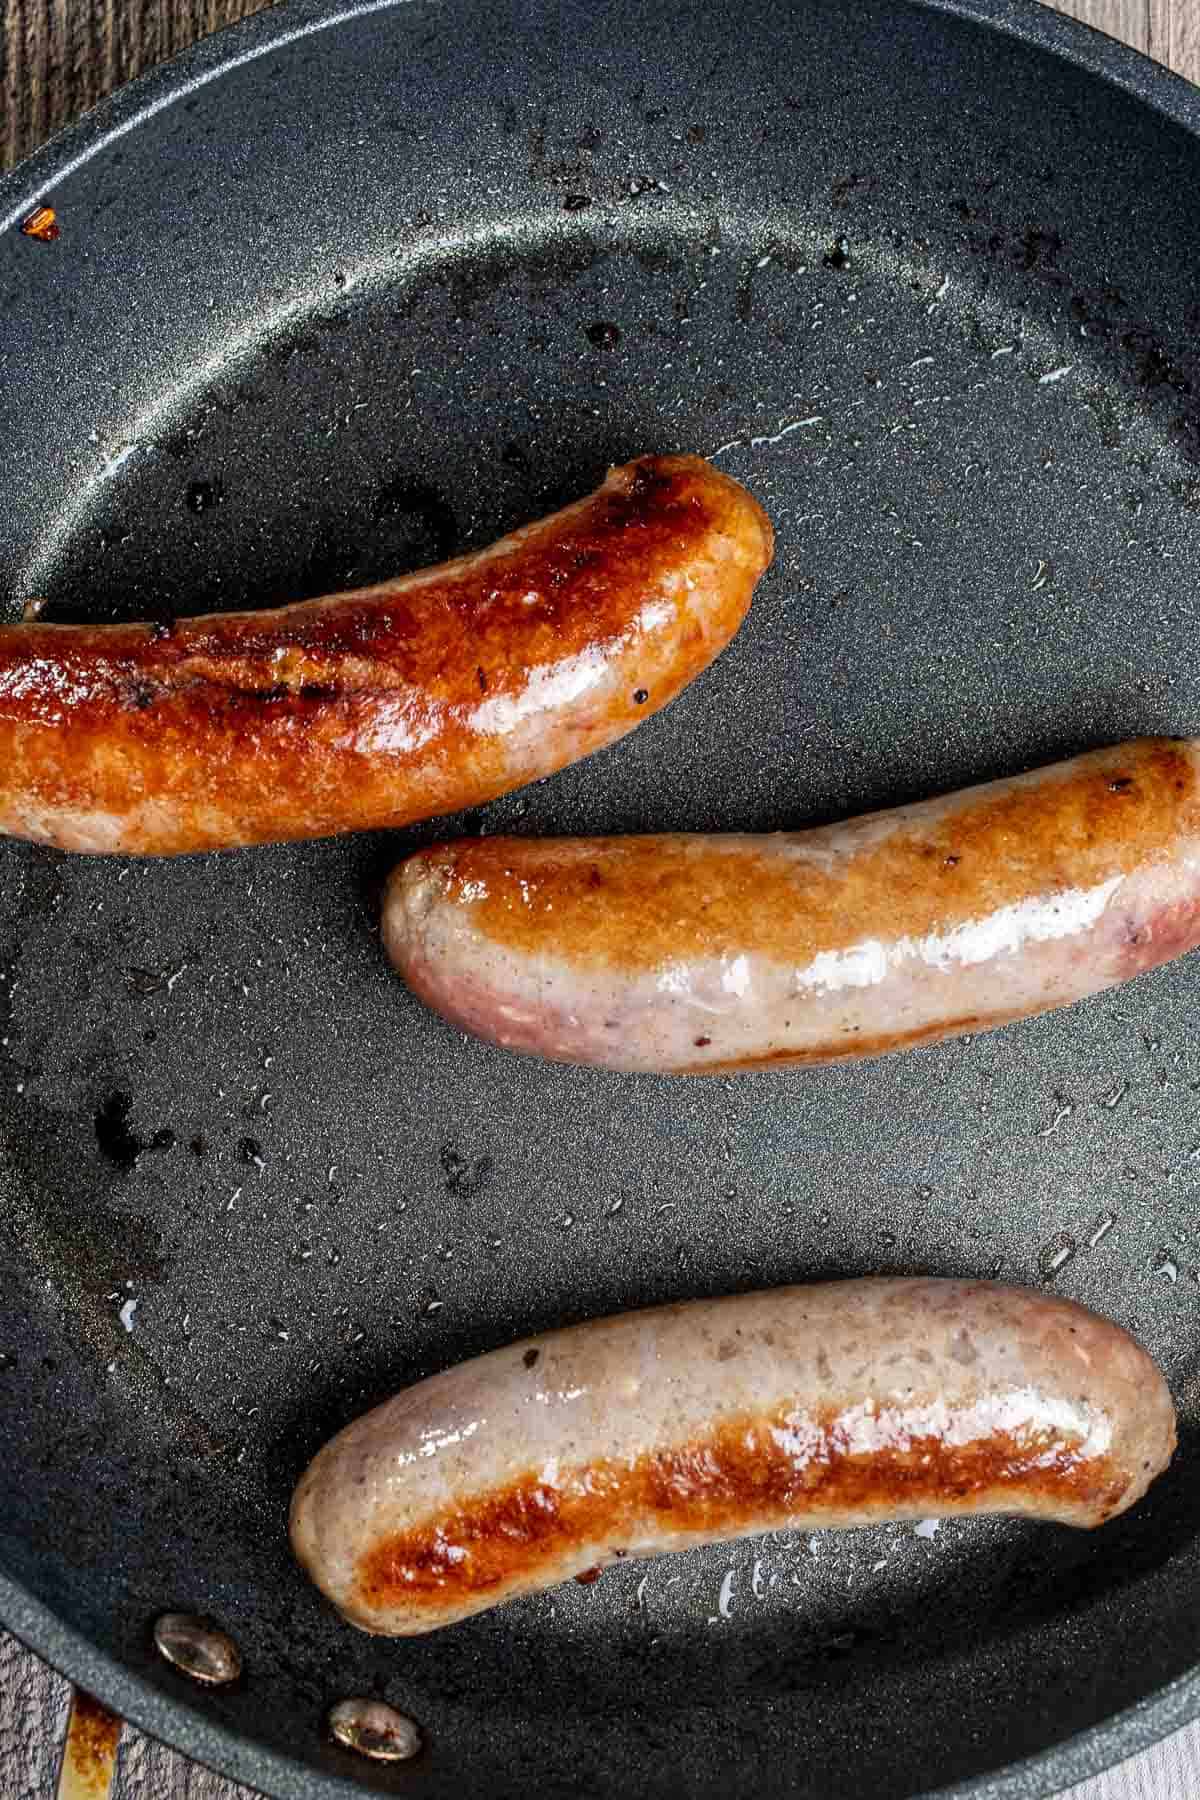 Searing and browning Italian sausages in a skillet.